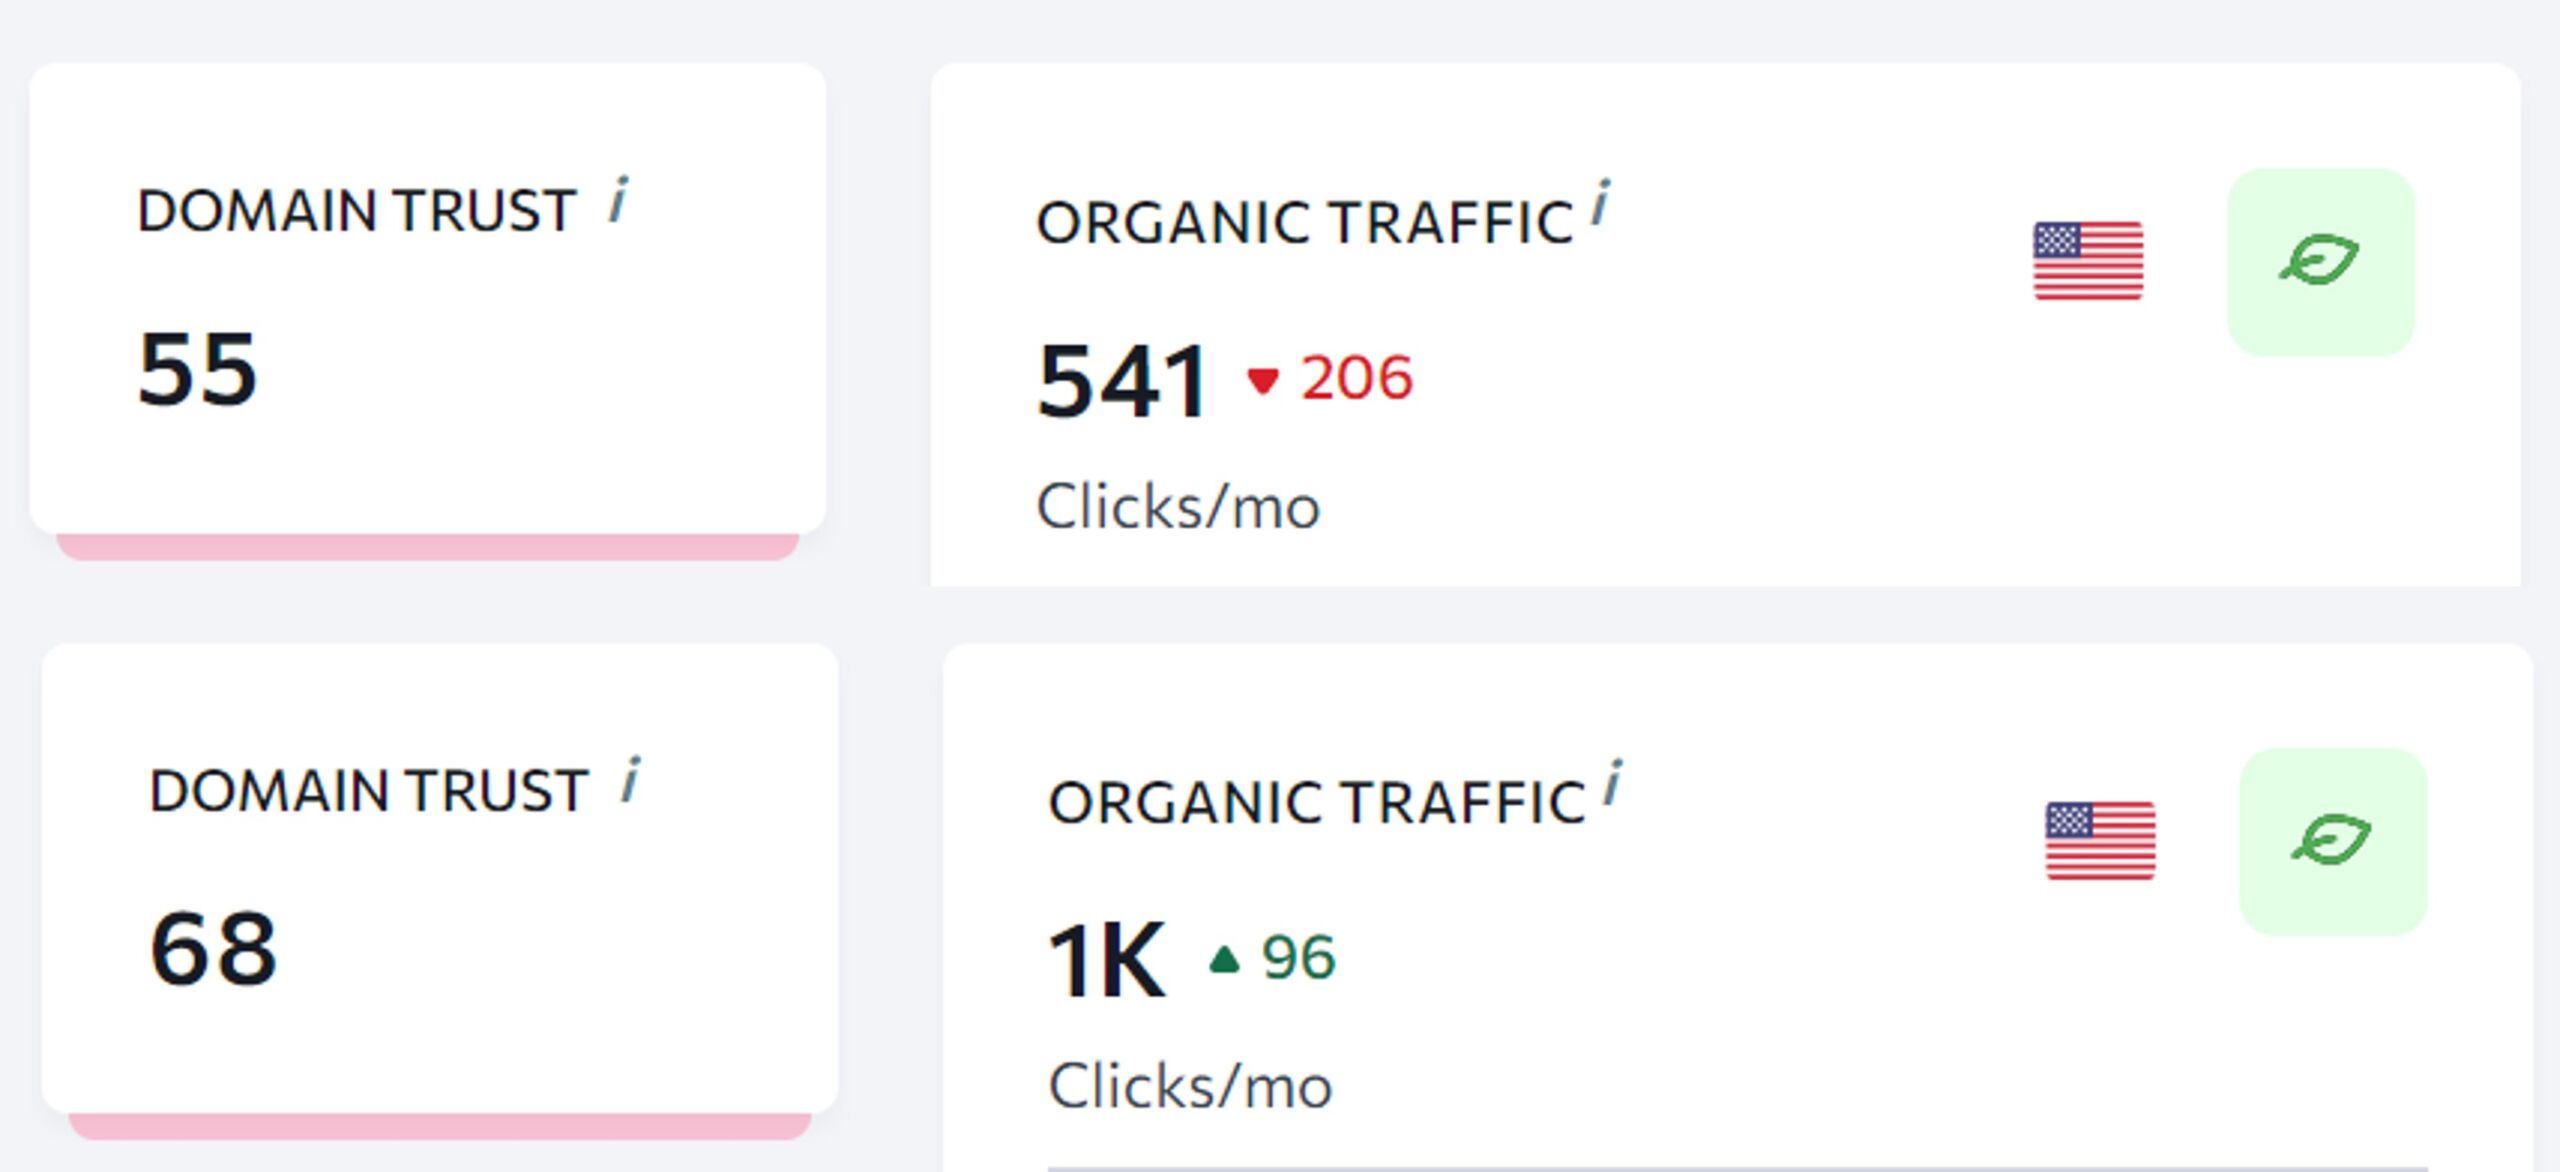 organic traffic factor is important for backlink quality